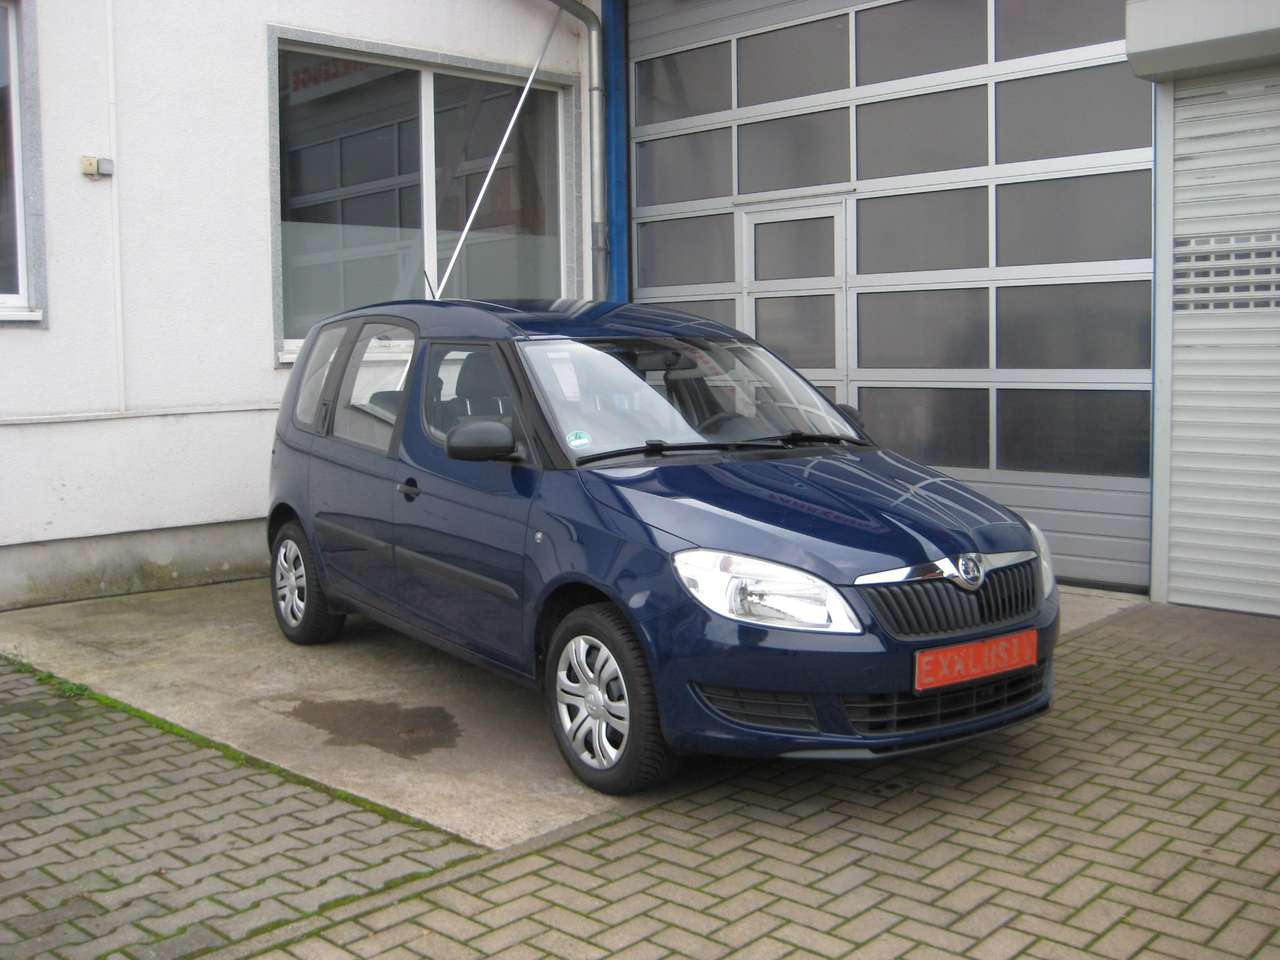 Image Skoda Roomster 1.4 MPI Ambition PLUS EDITION